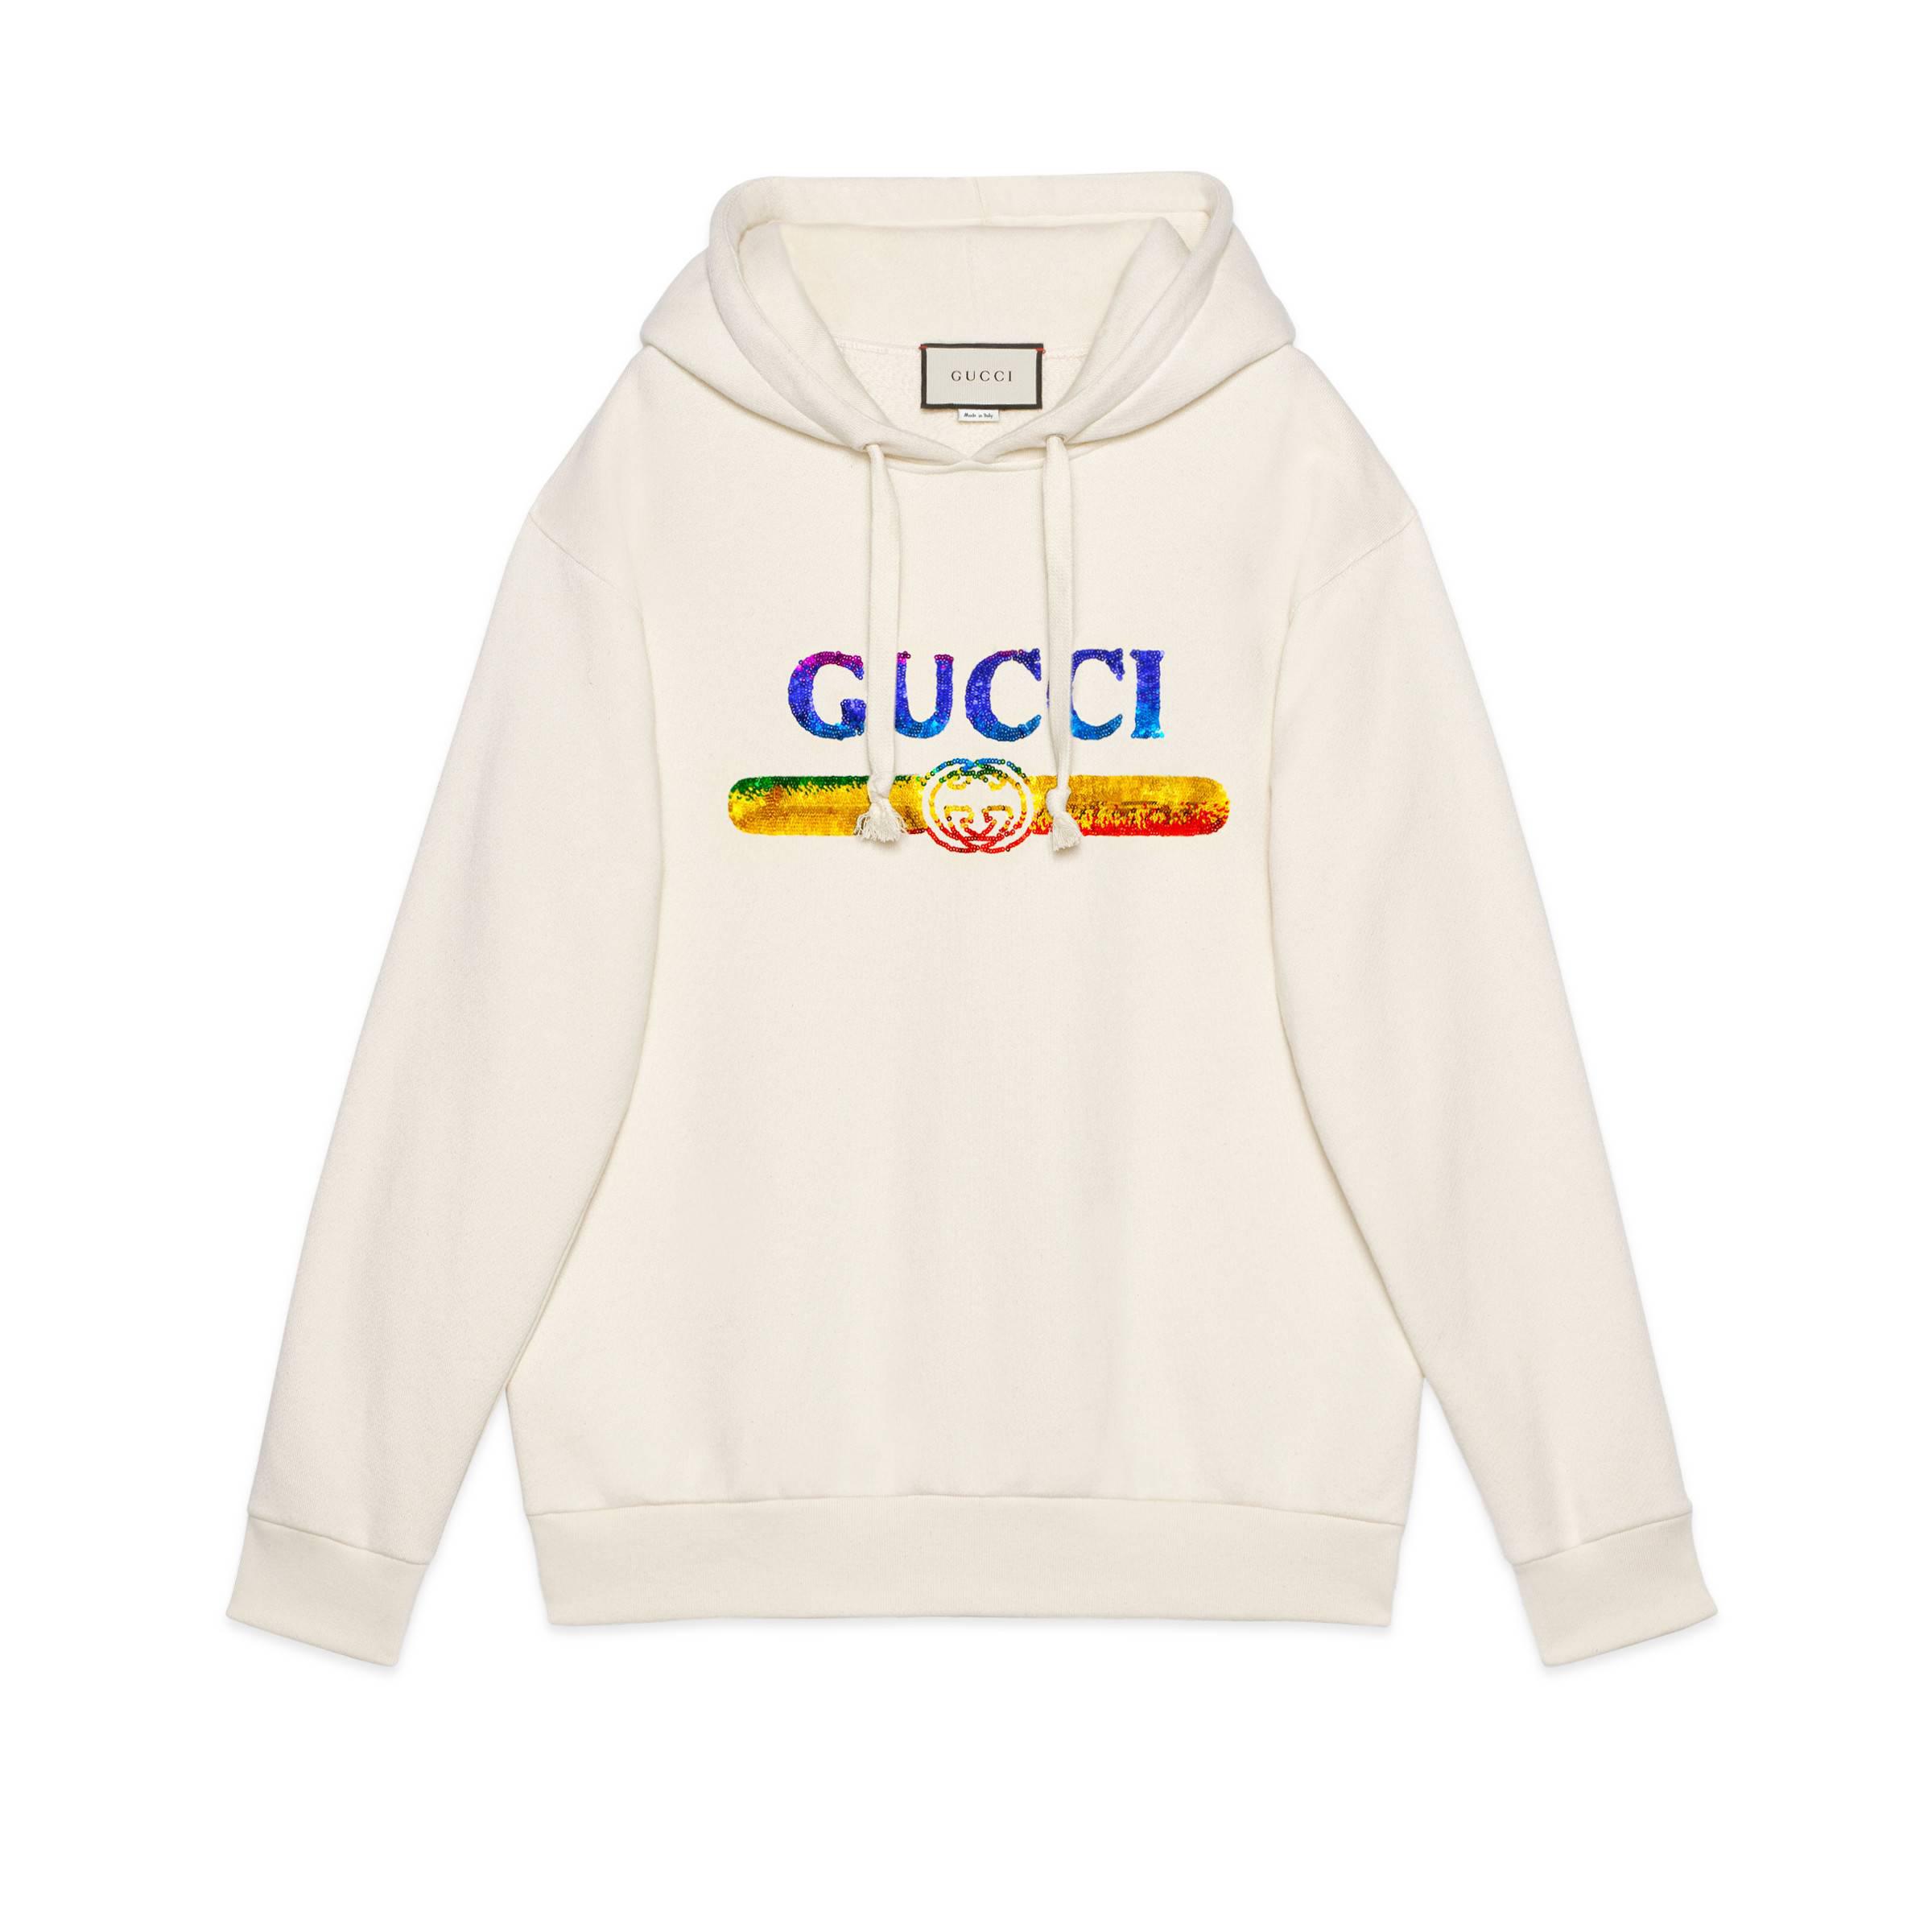 Gucci Sweatshirt With Sequin Logo in White | Lyst